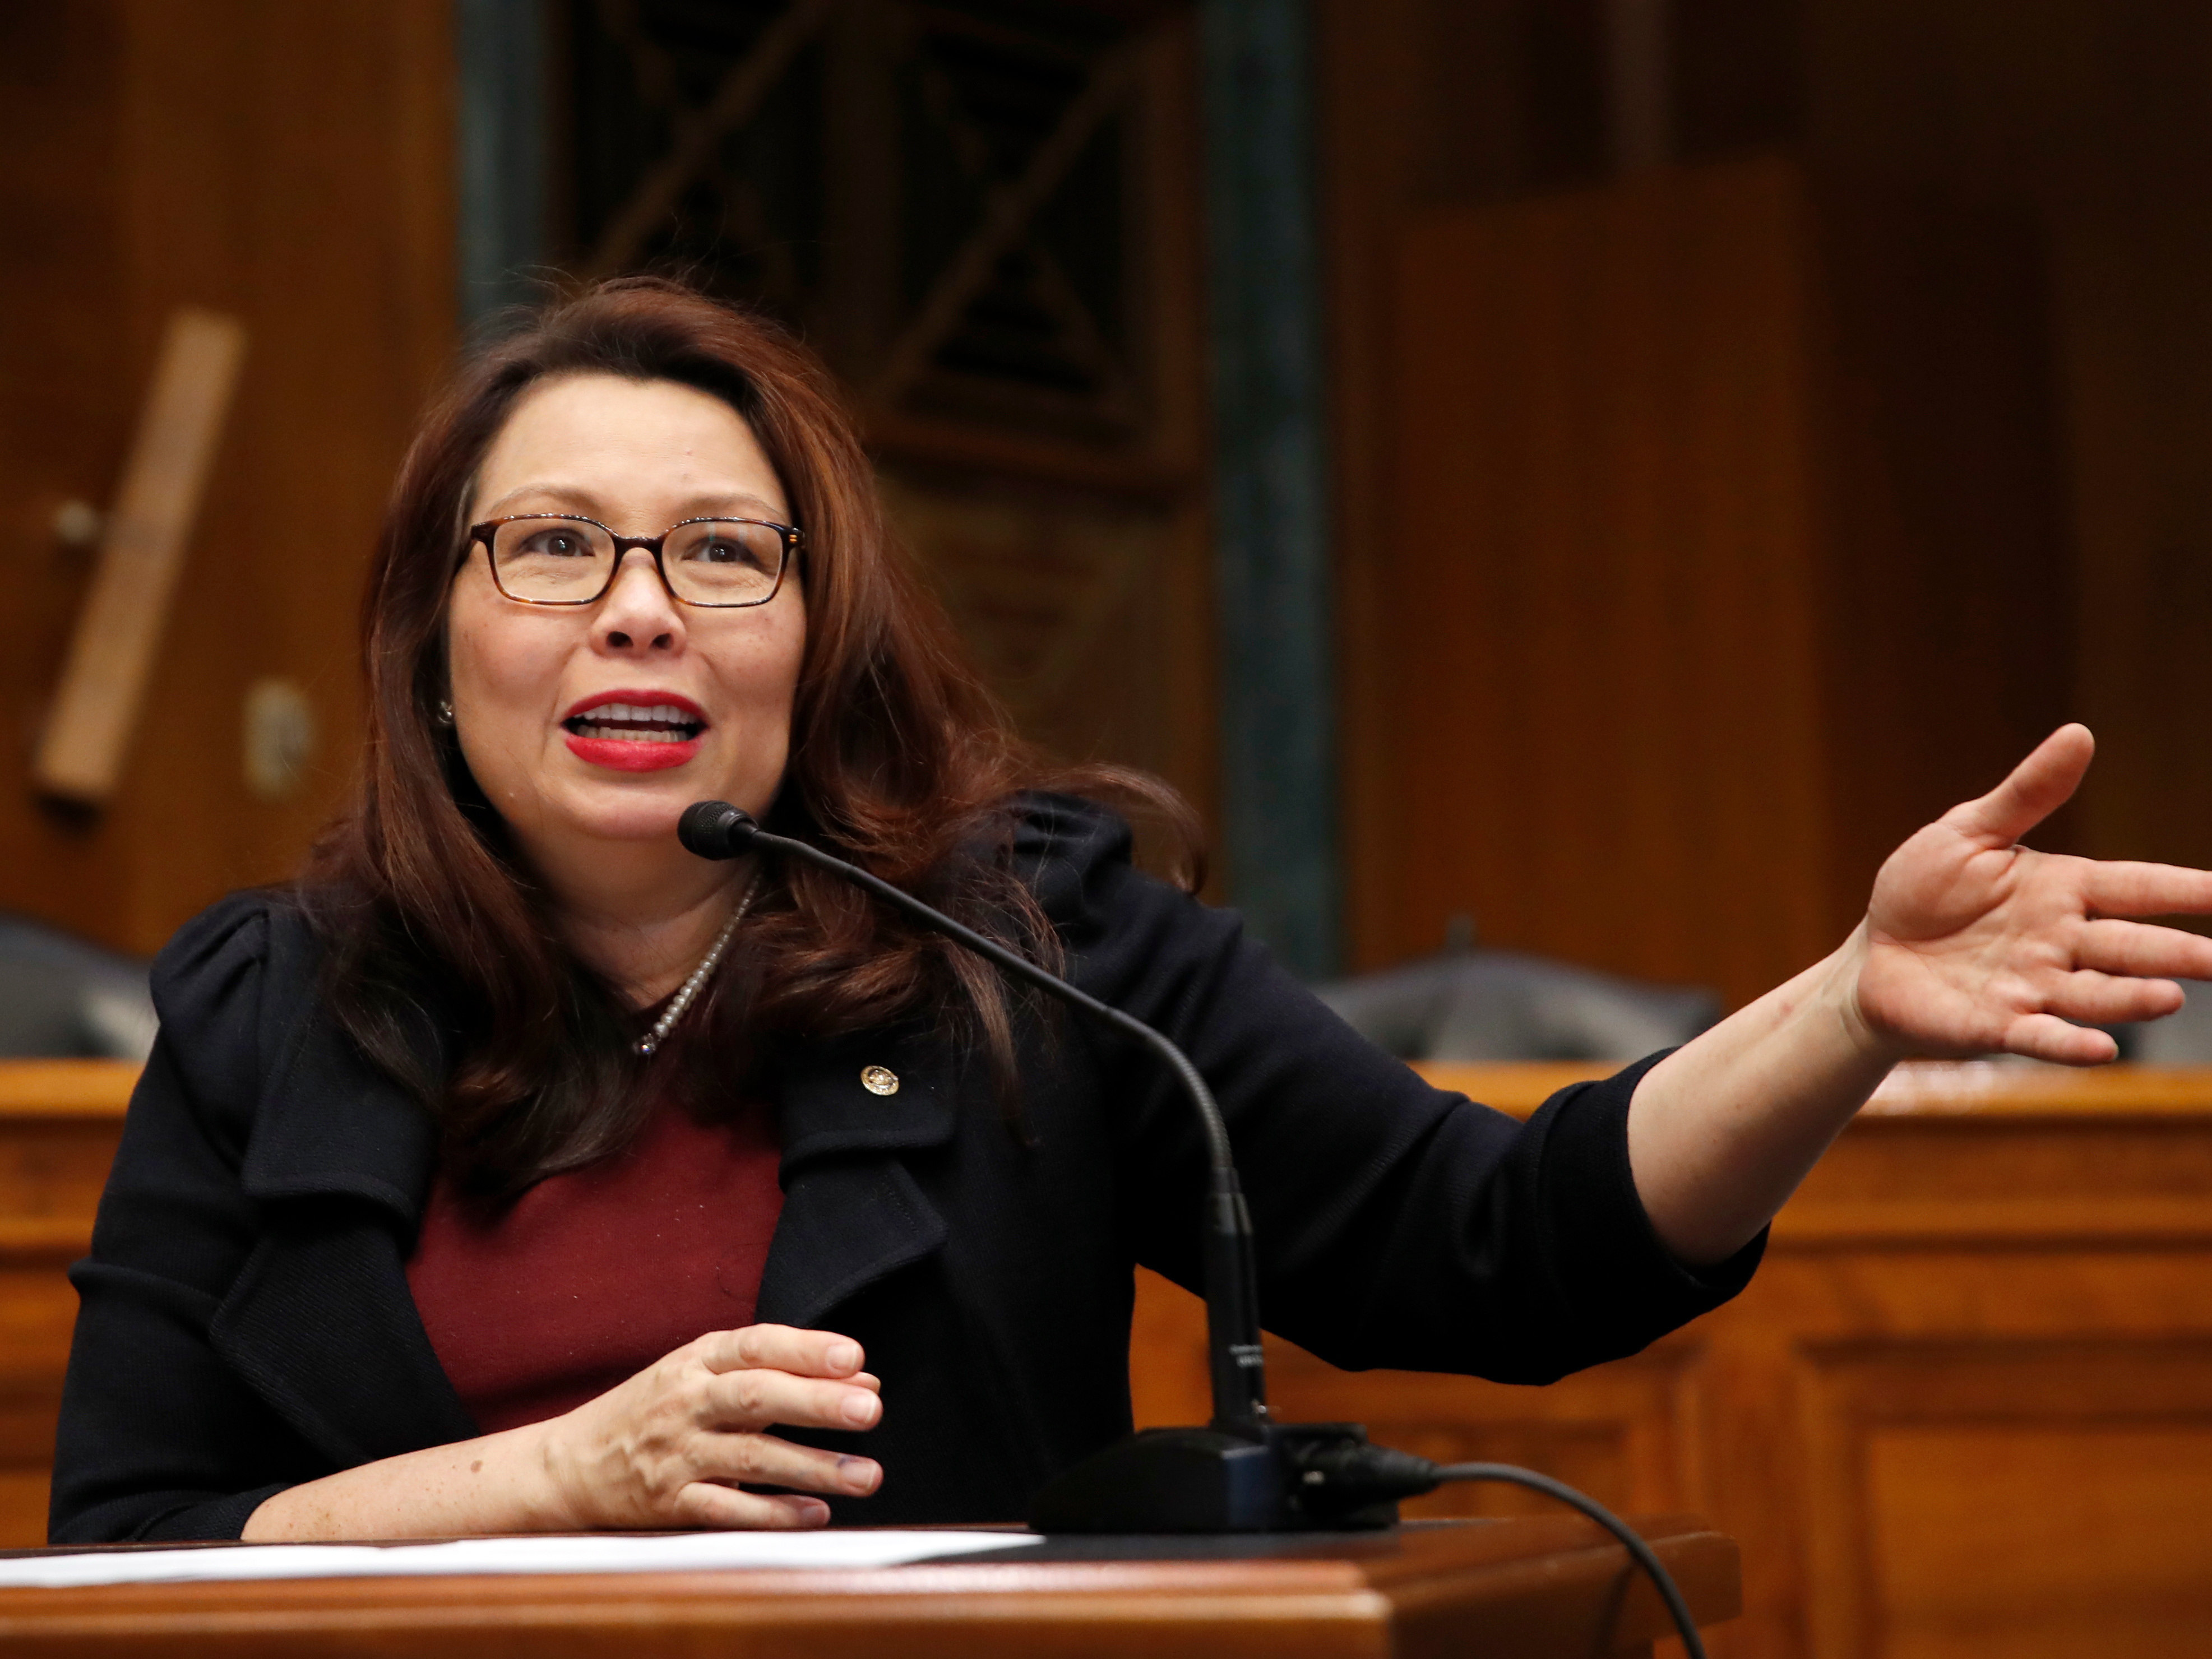 Sen. Tammy Duckworth, seen here in February on Capitol Hill, announced the birth of a daughter, making her the first U.S. senator to give birth while in office. (Photo by Alex Brandon/Associated Press)